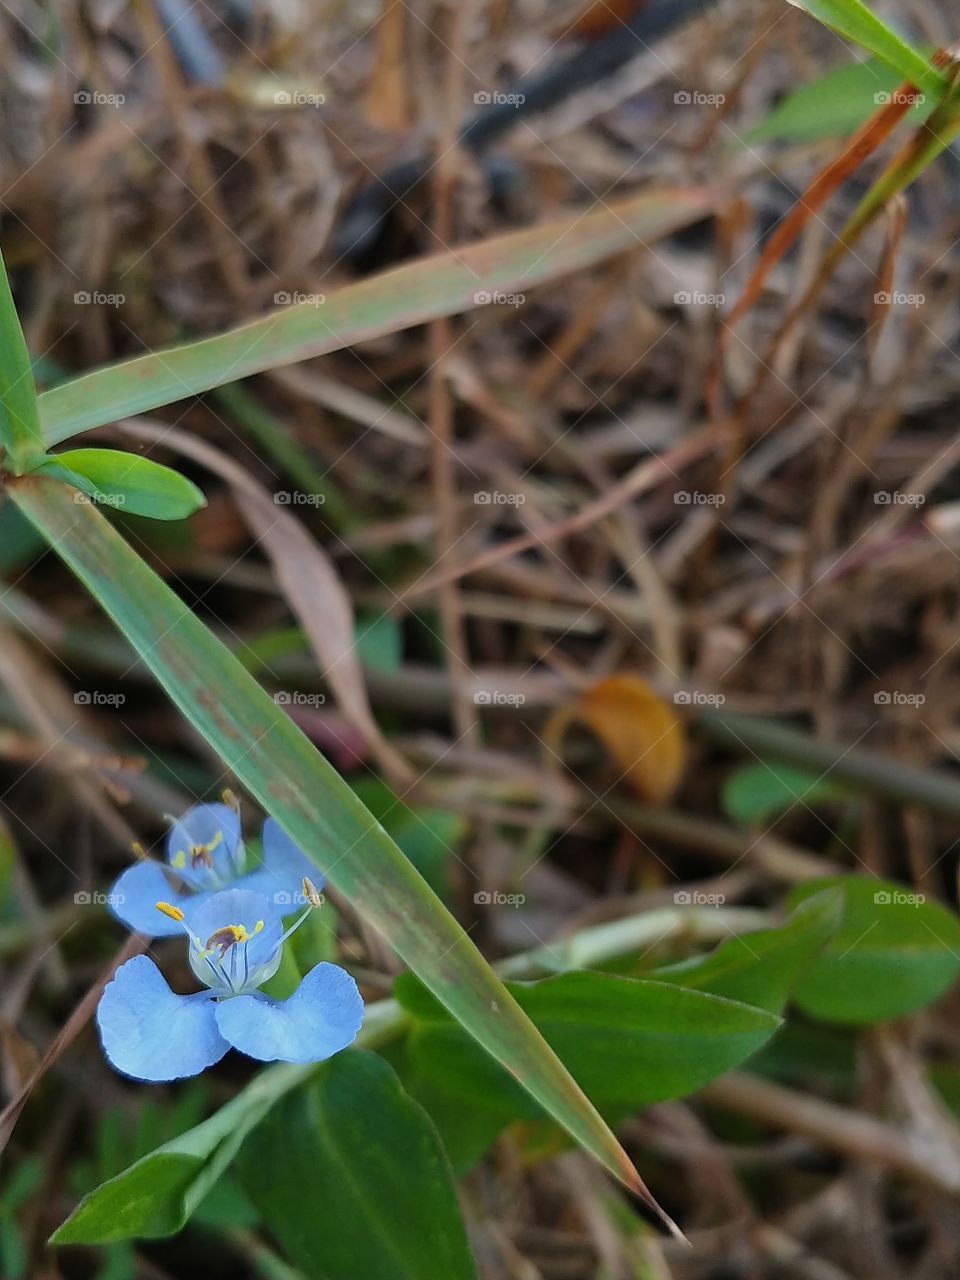 Tiny blue flowers growing amongst blades of grass and leaves next to a fence with dead twigs.